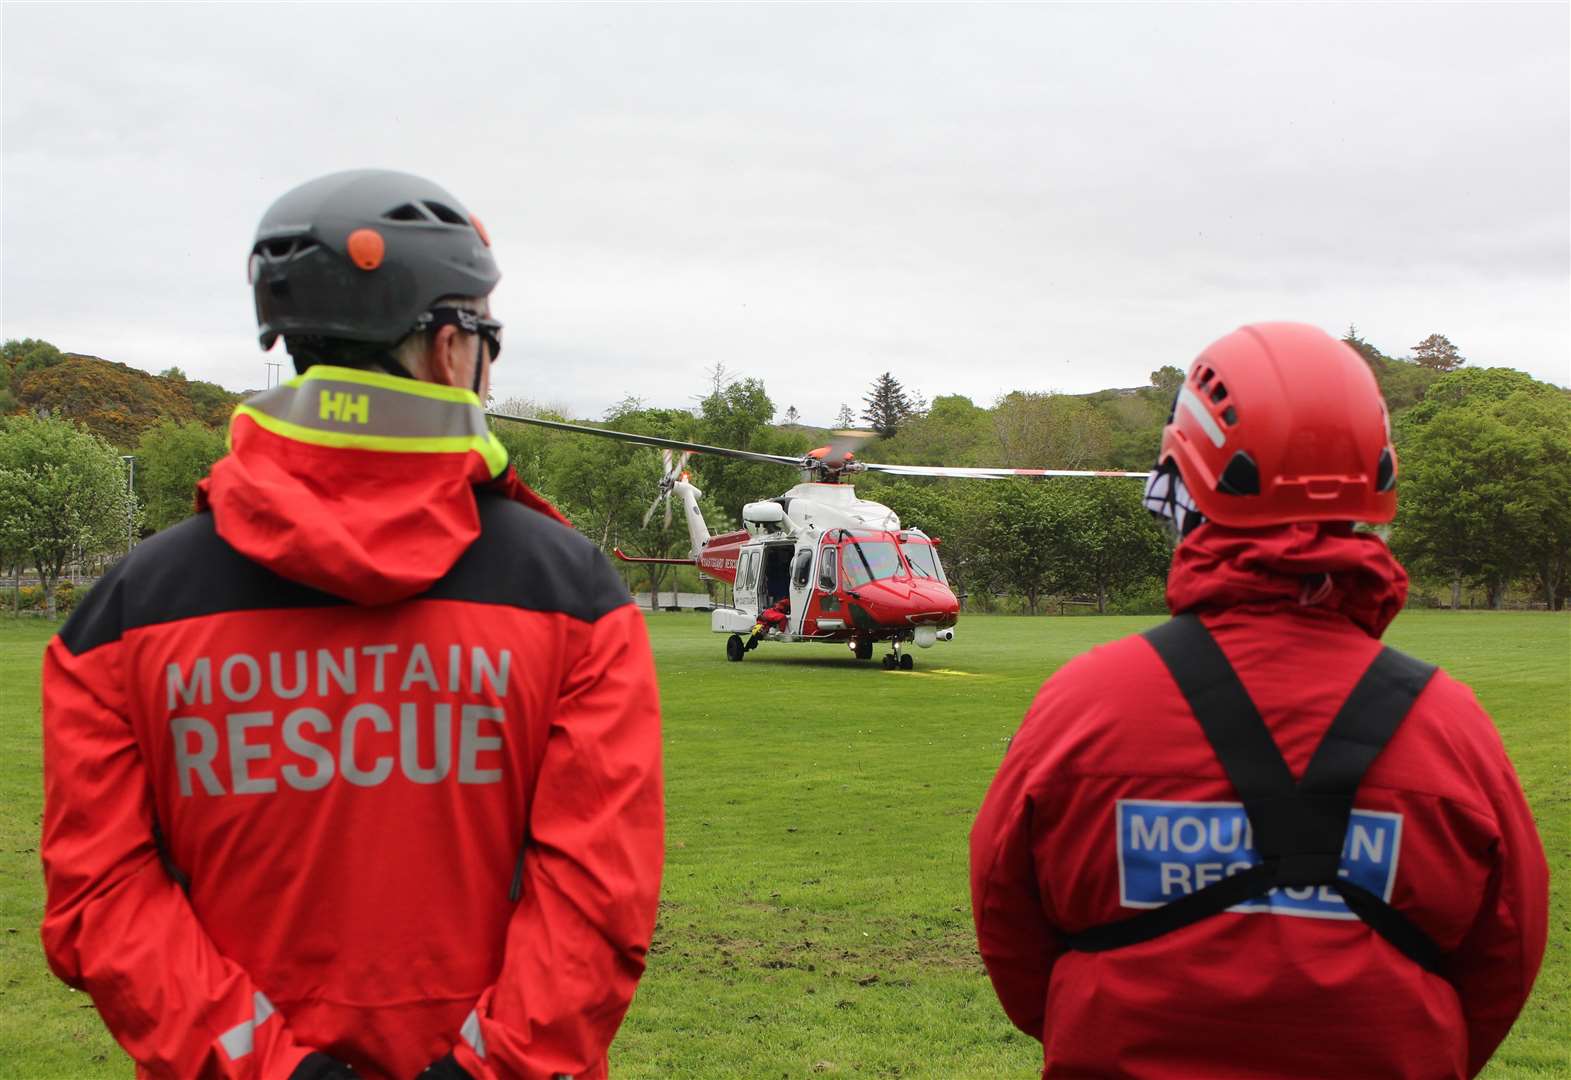 It’s about more than mountains for rescue team